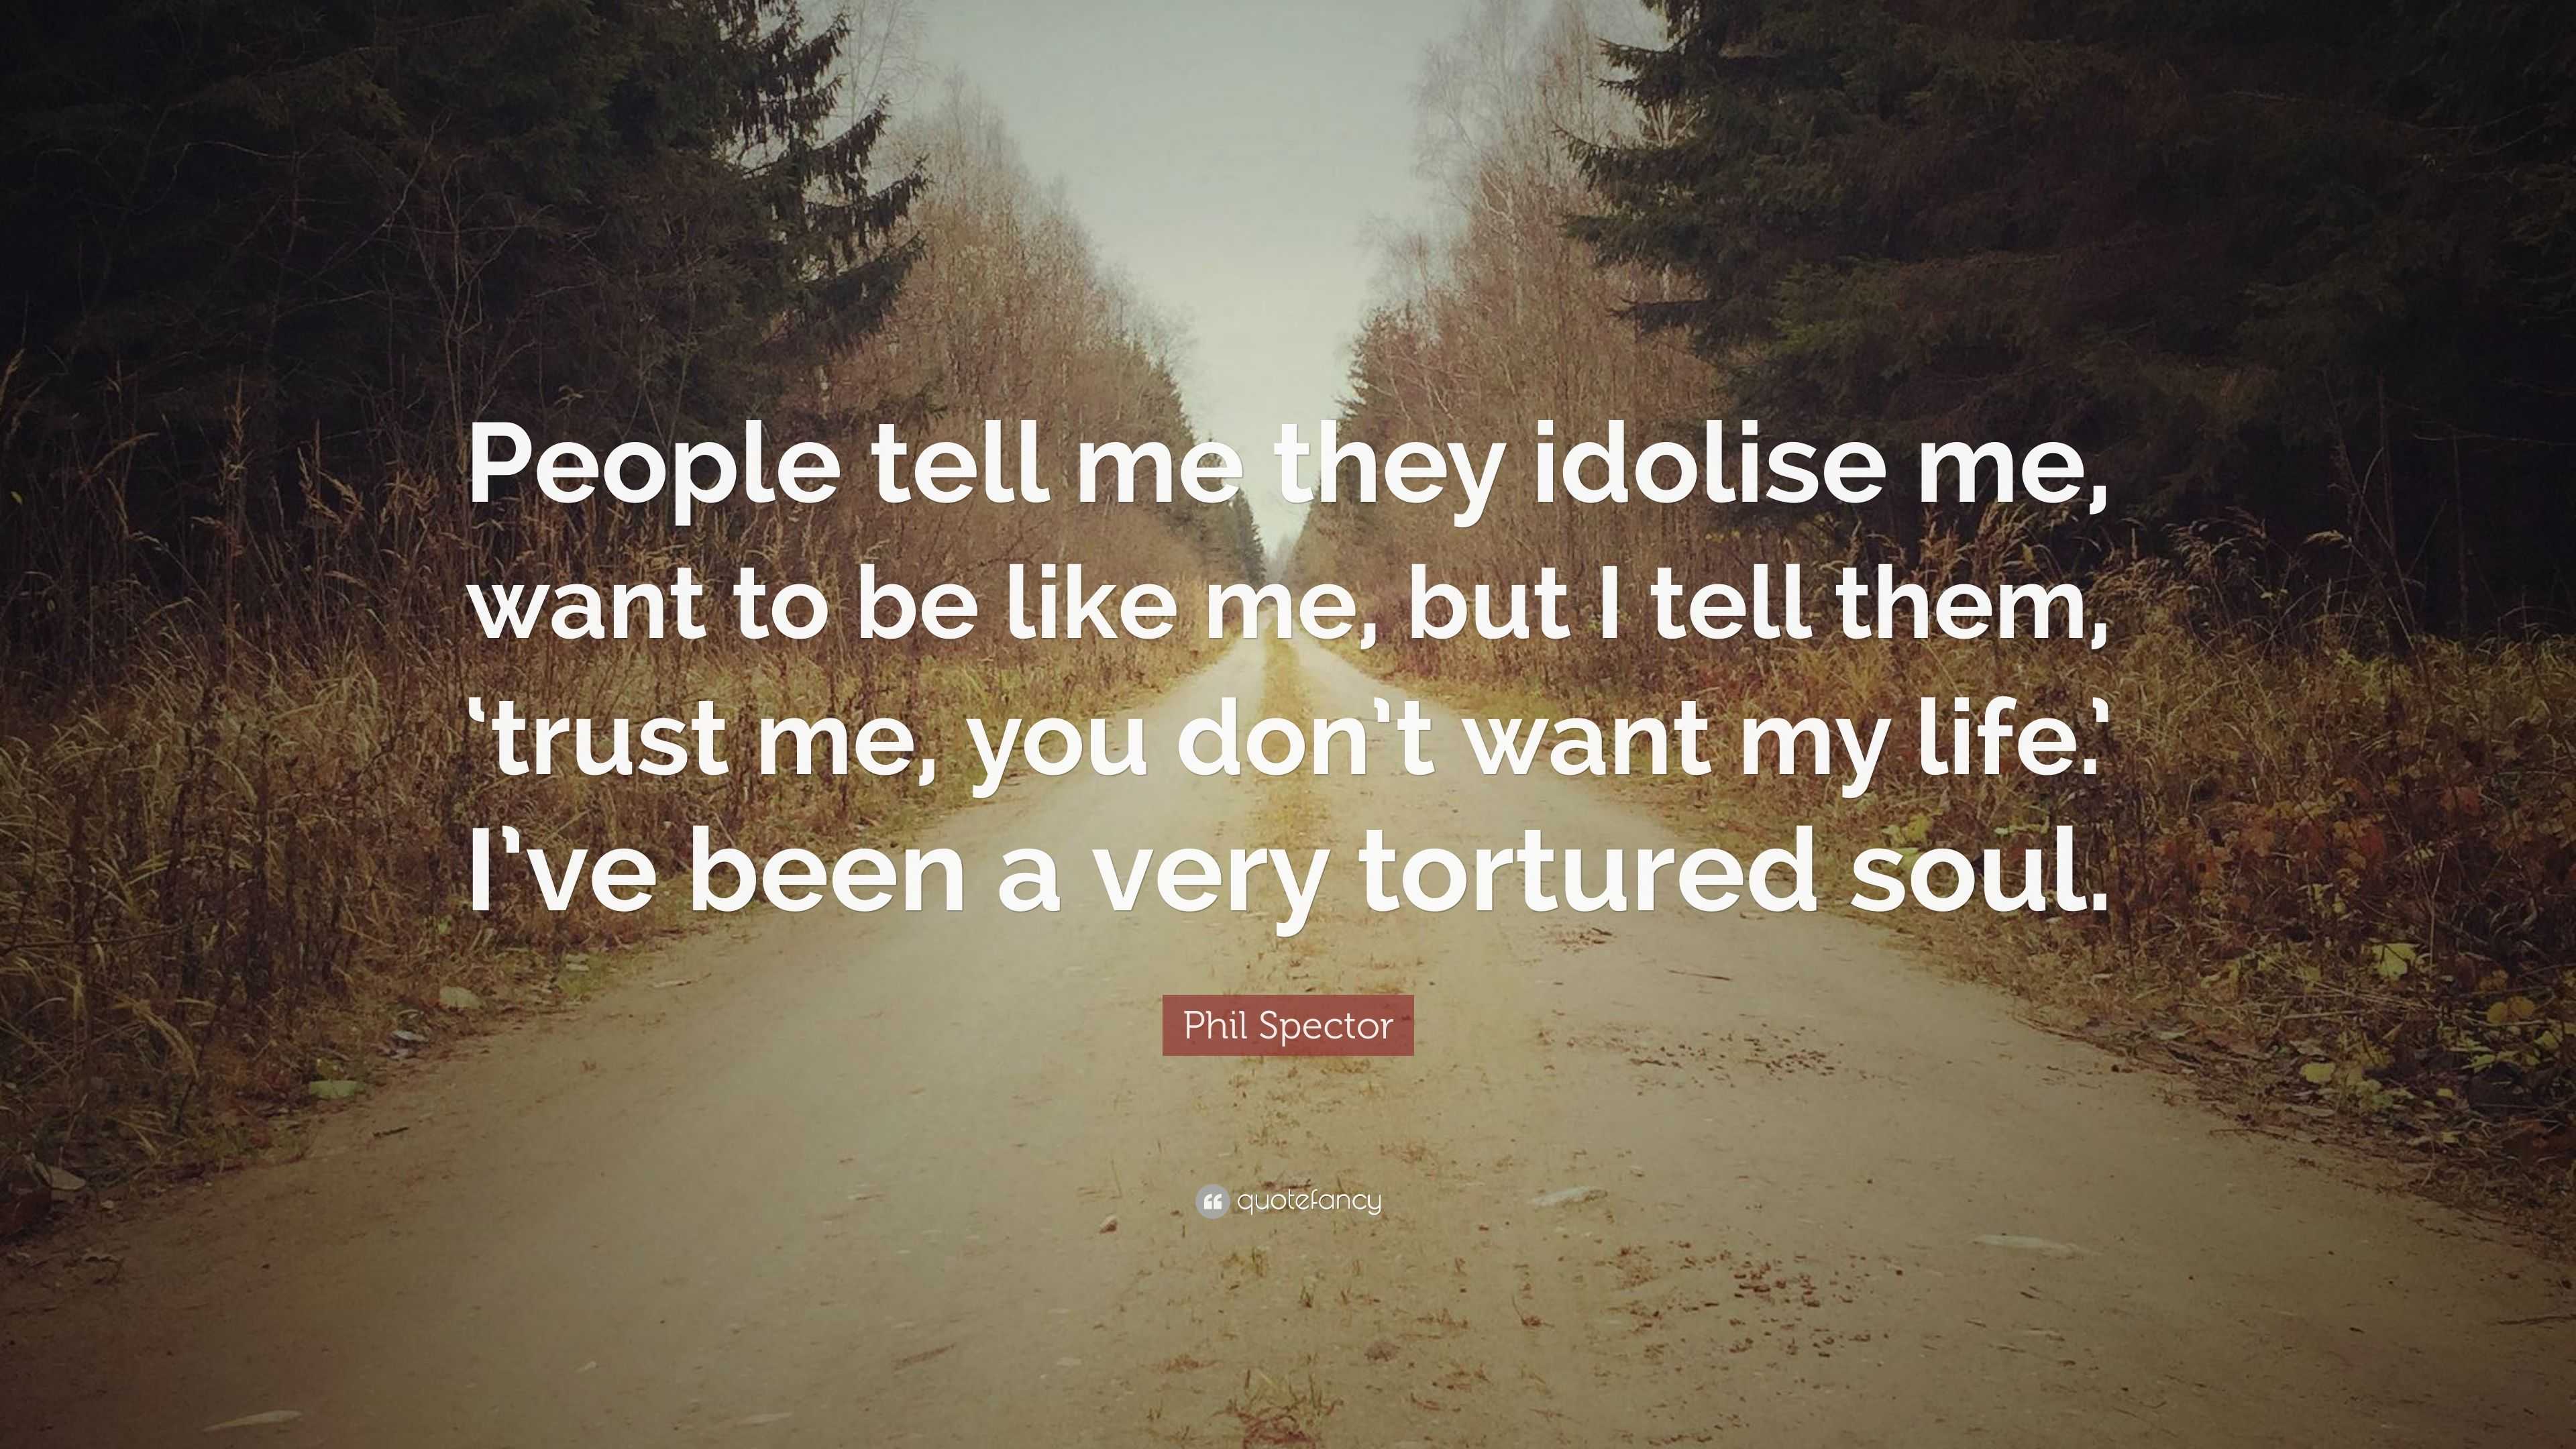 Phil Spector Quote: “People tell me they idolise me, want to be like me ...